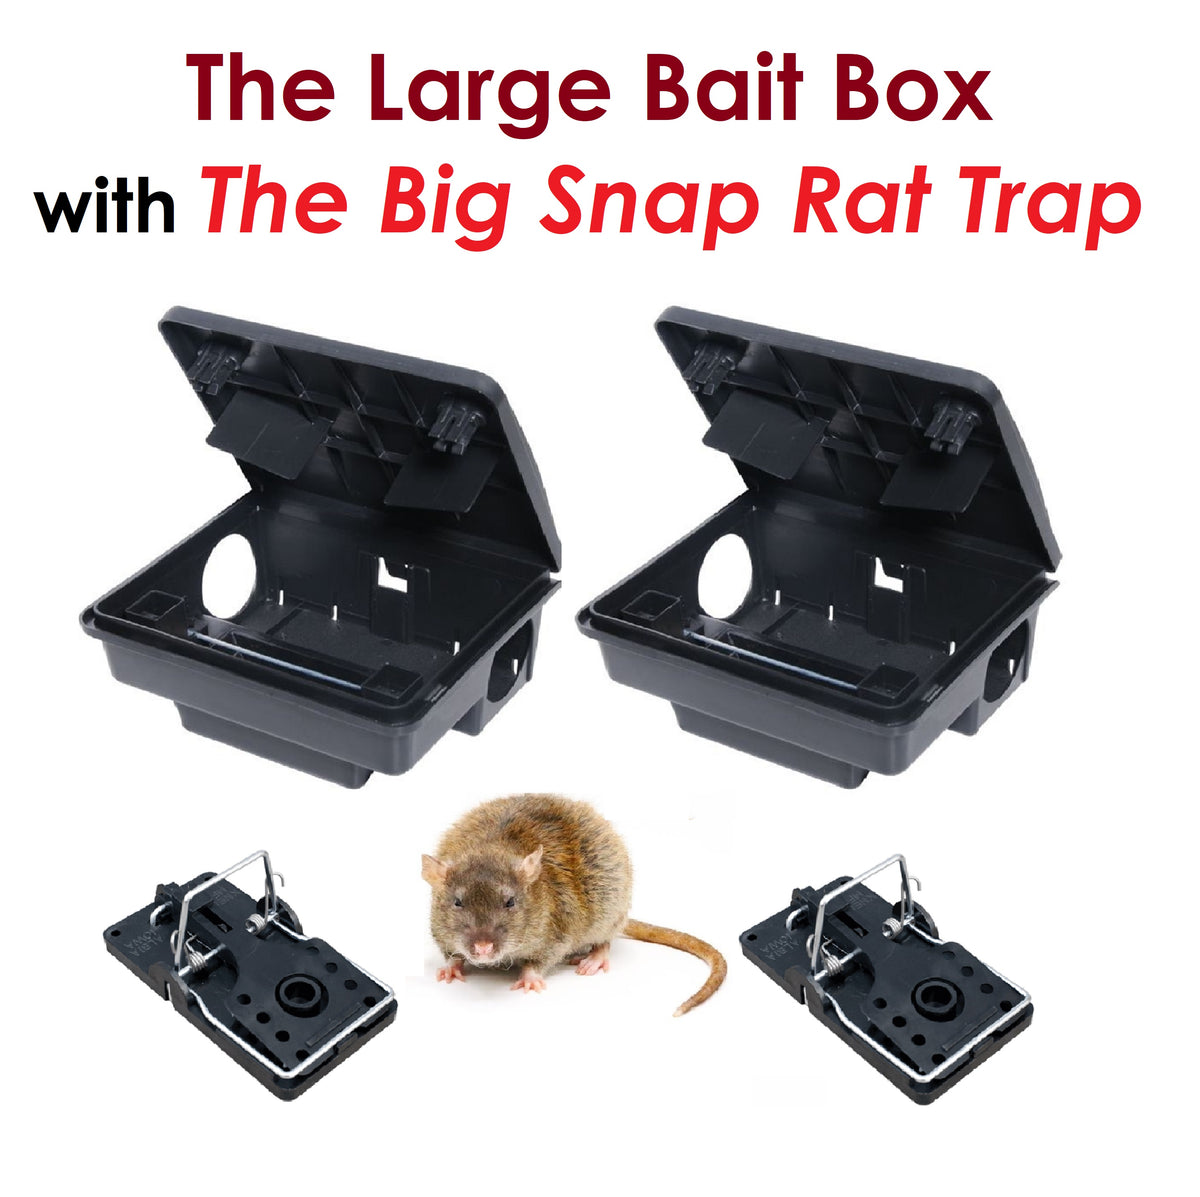 Professional Quality Rodent Bait Box Kit or Snap Trap Killer